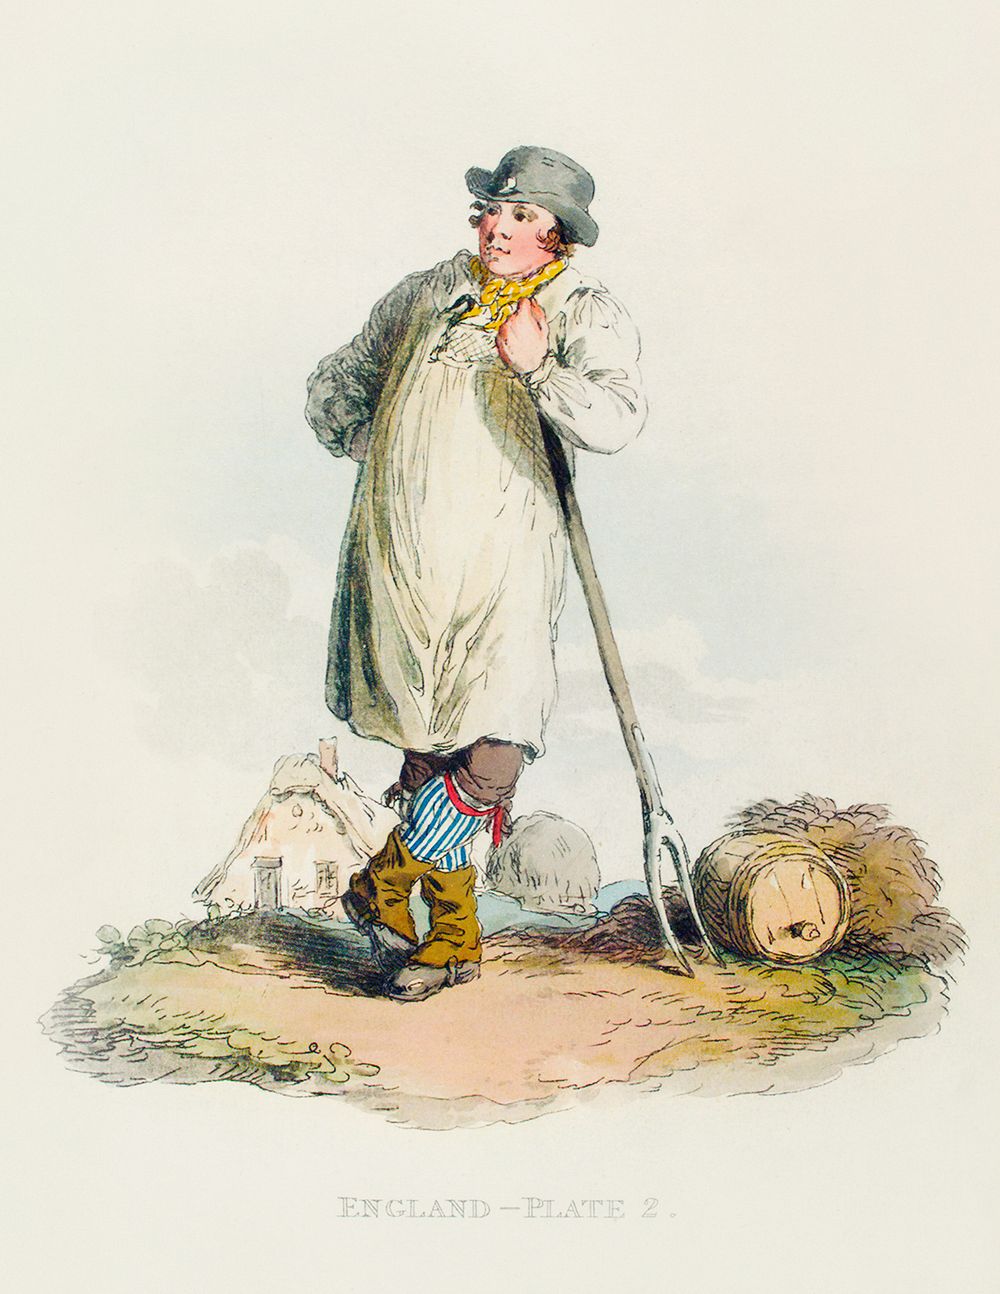 Illustration of a farmer's boy from Picturesque Representations of the Dress and Manners of the English(1814) by William…